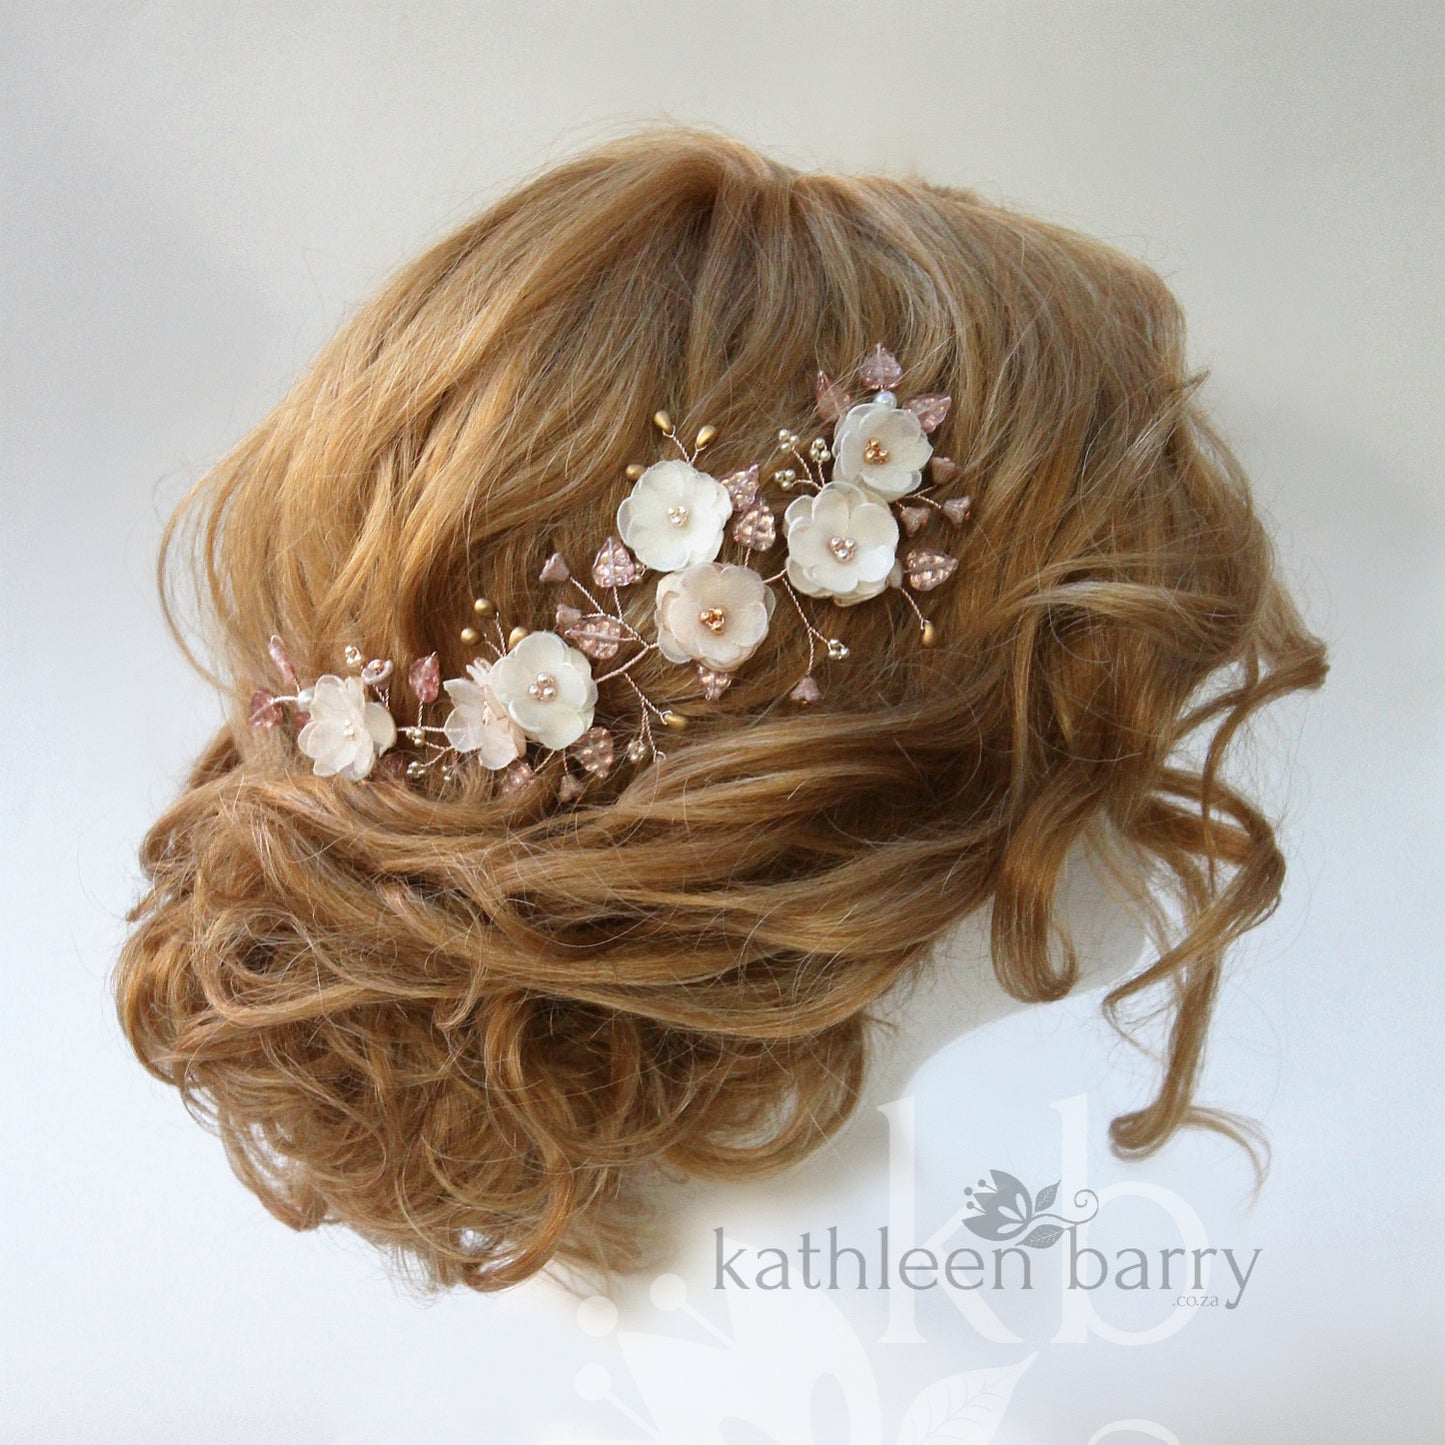 Stacey floral hairpiece - Bridal wedding flower hair accessory - champagne, ivory rose gold